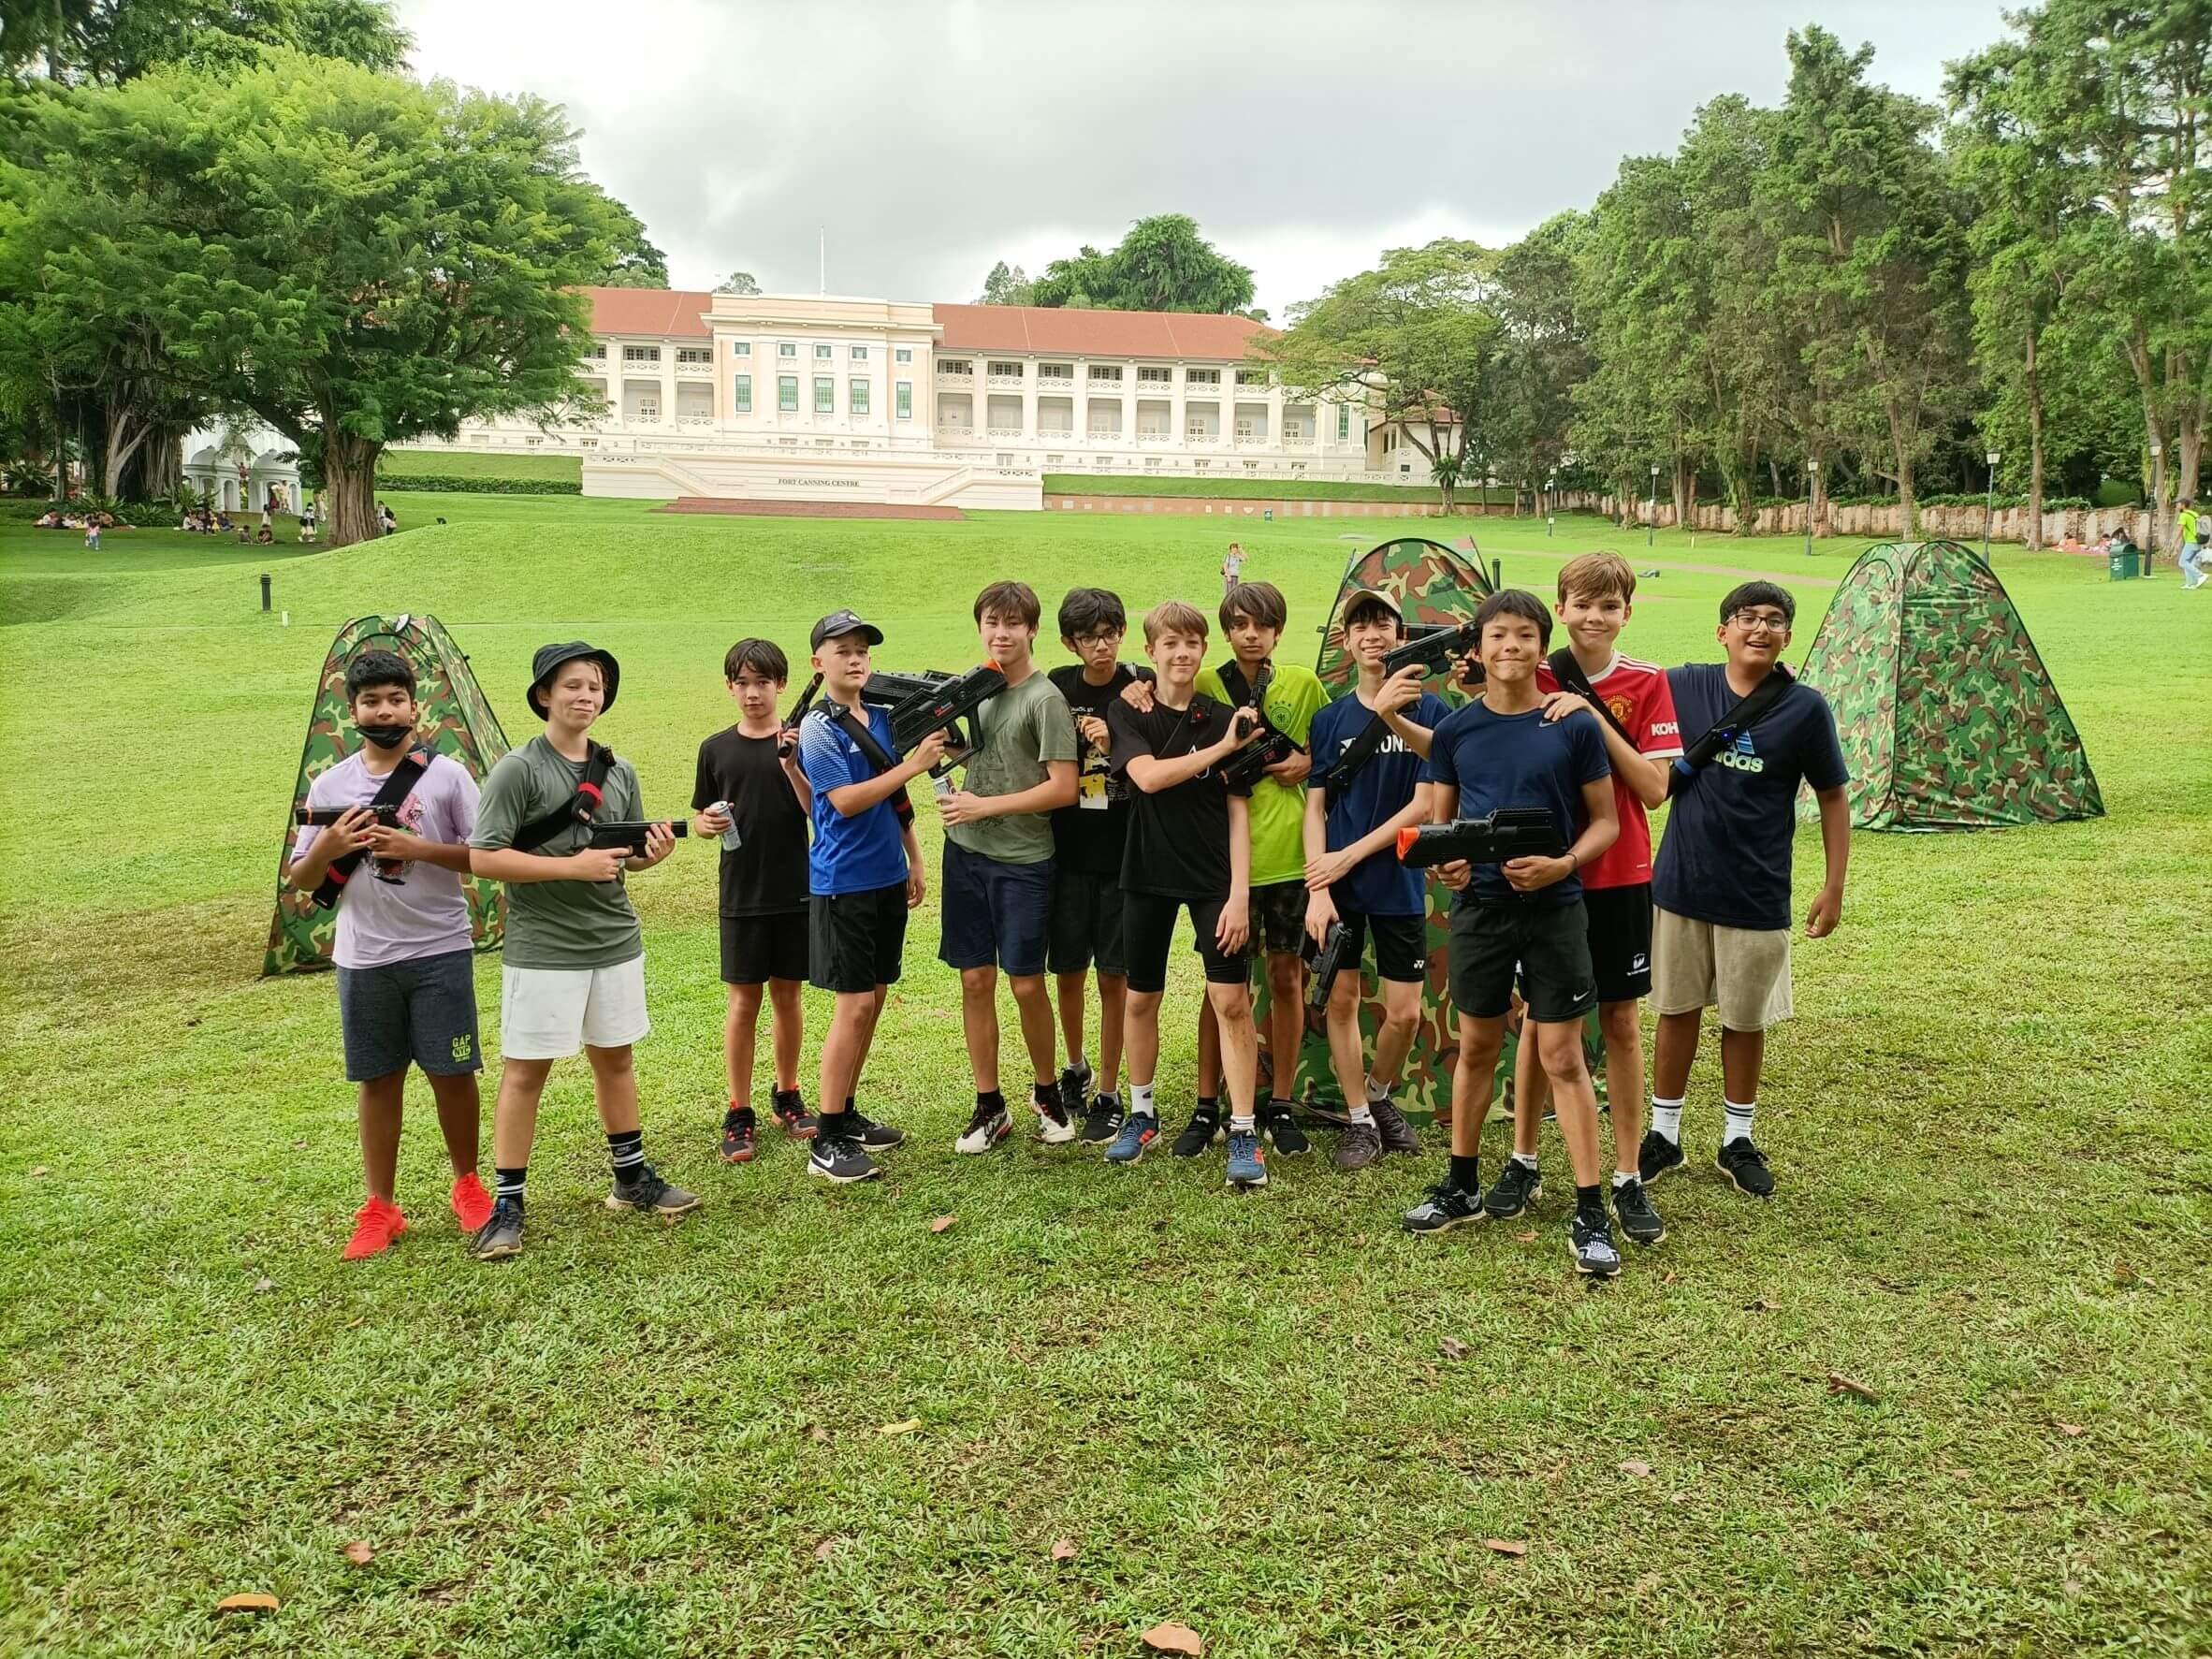 Outdoor Laser Tag at Fort Canning Park